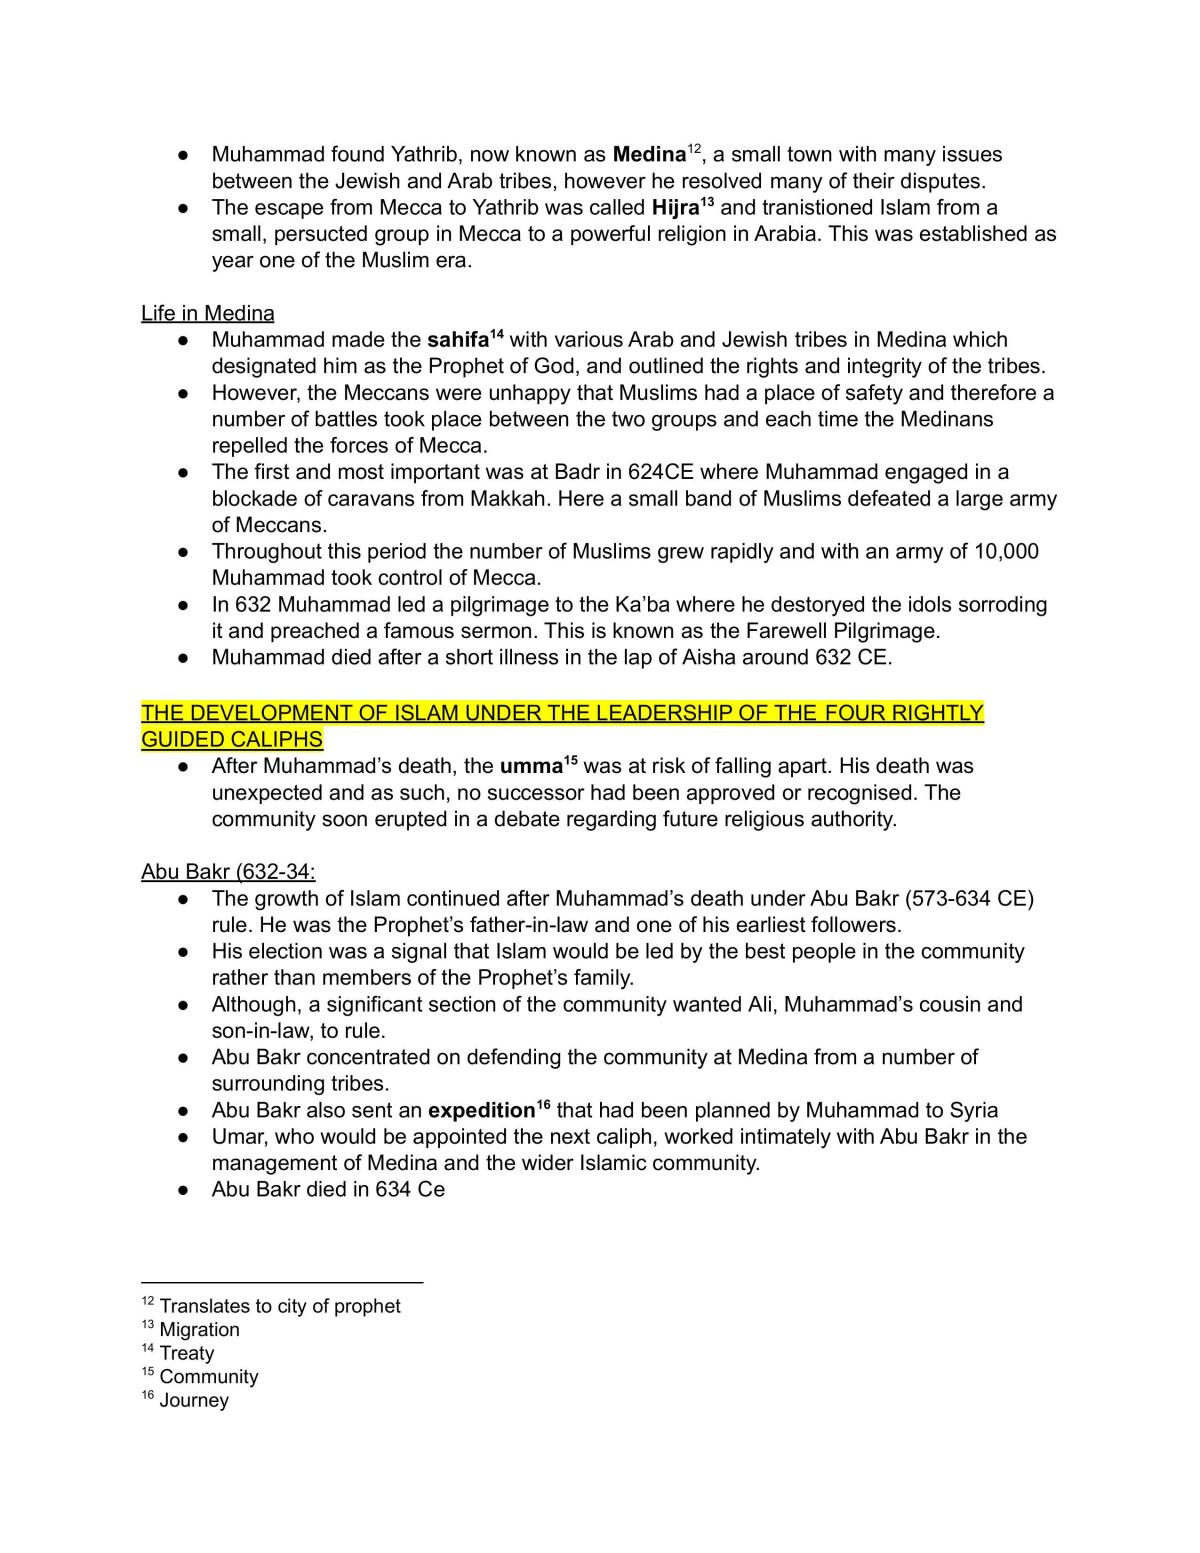 SOR Summary Notes  - Page 15